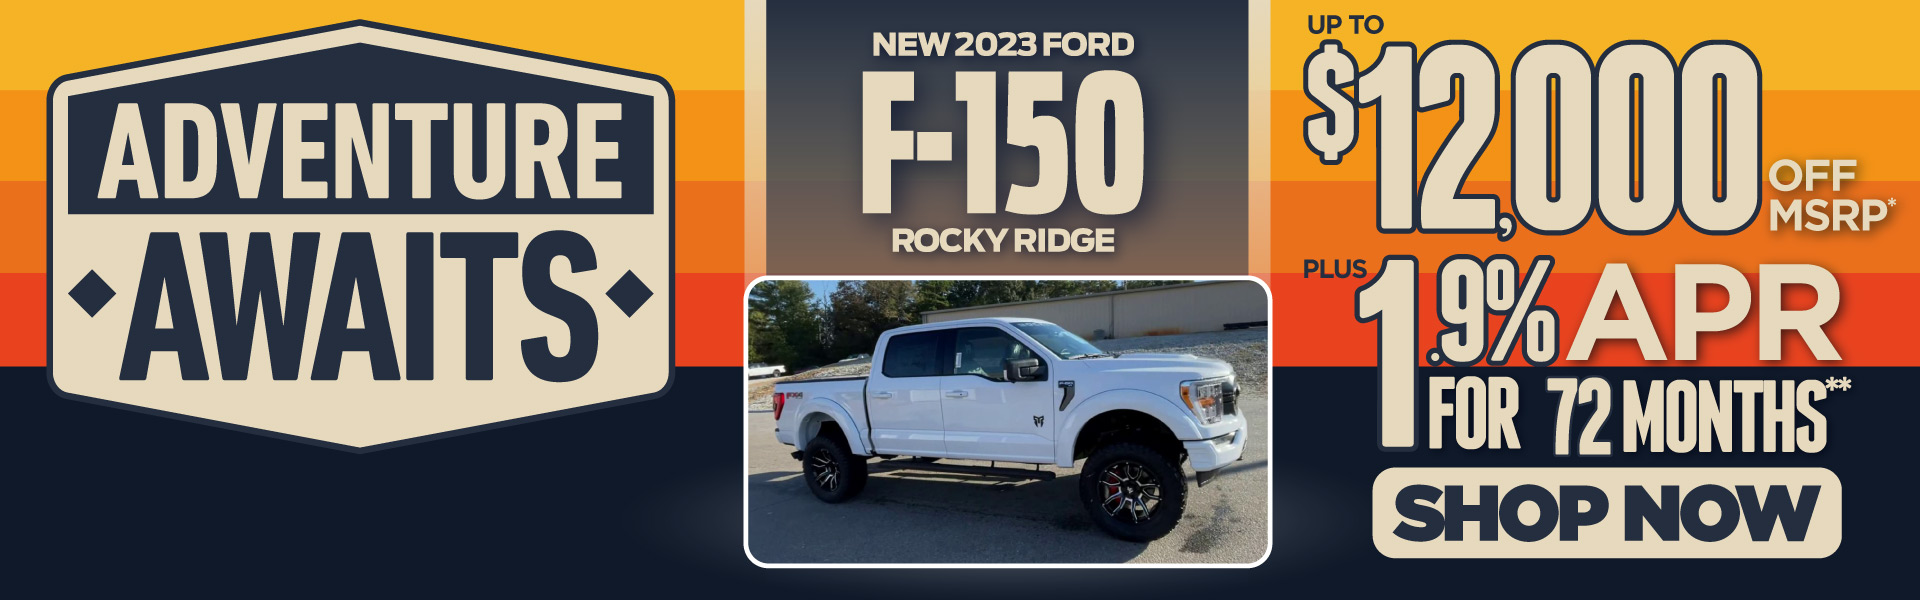 new 2023 f-150 | 1.9% apr for up to 72 months | act now